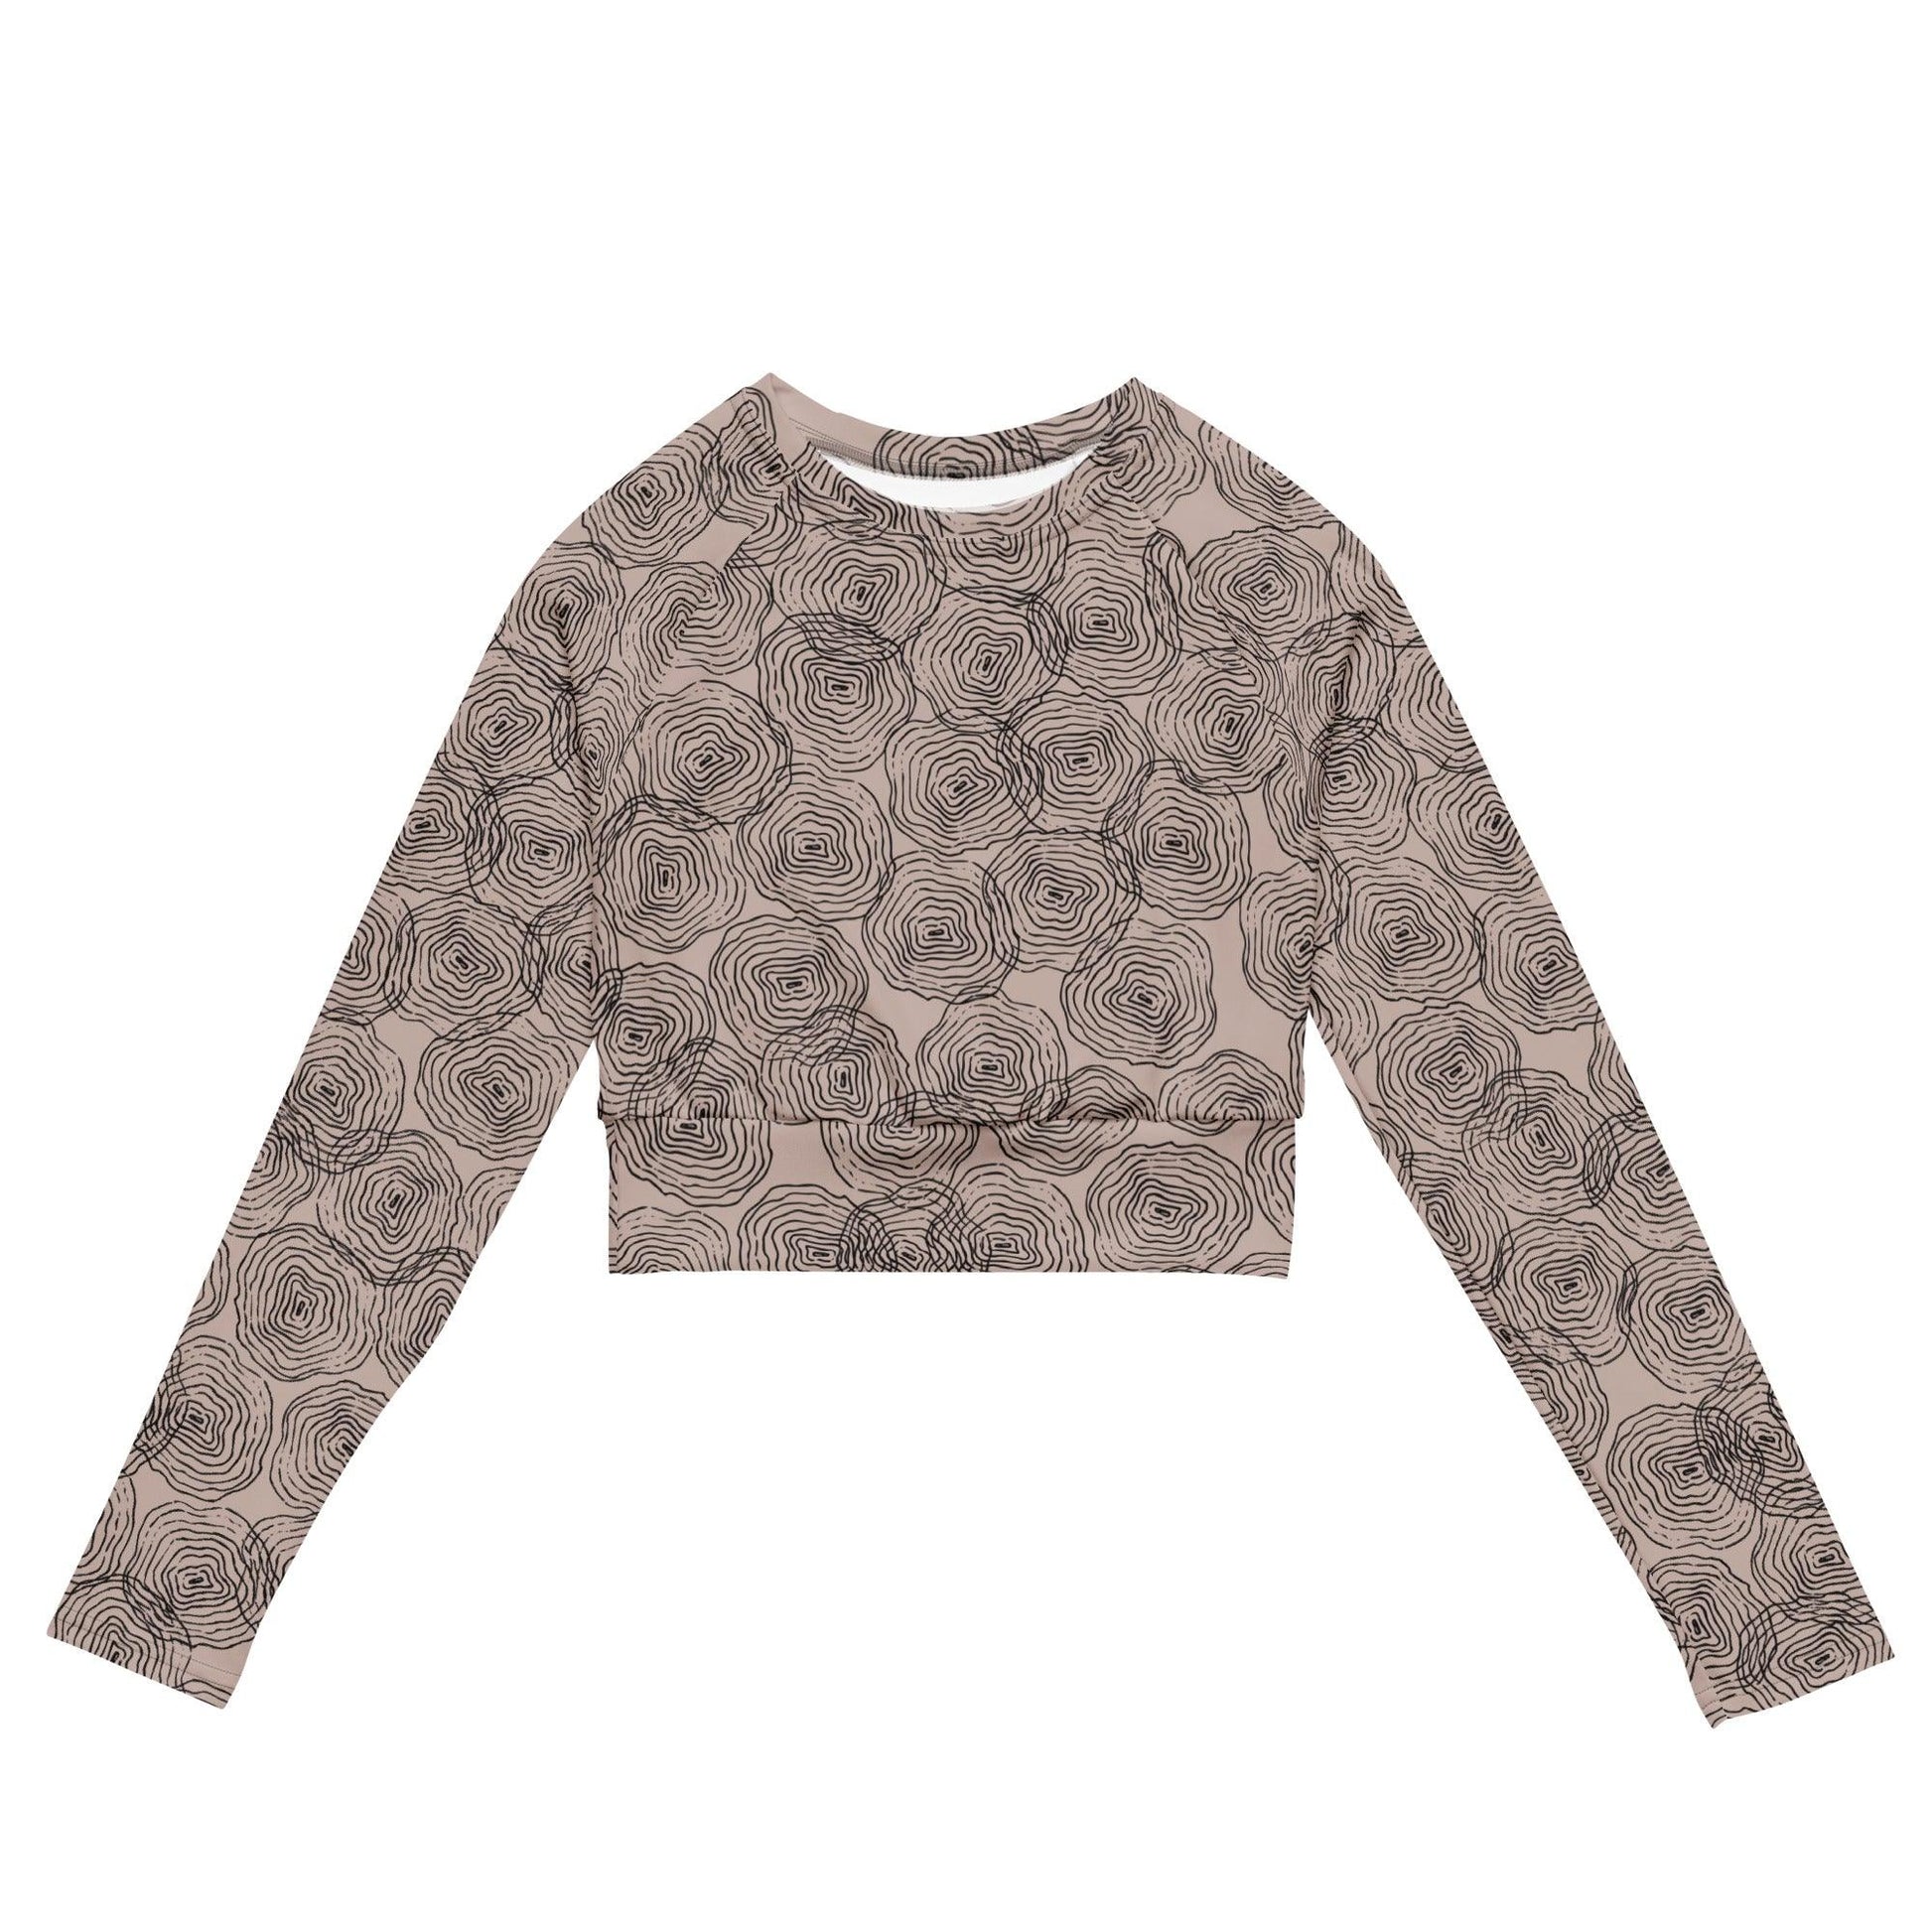 Ripple in Gray Long Sleeved Crop Top Rash Guard - Solshine and Co